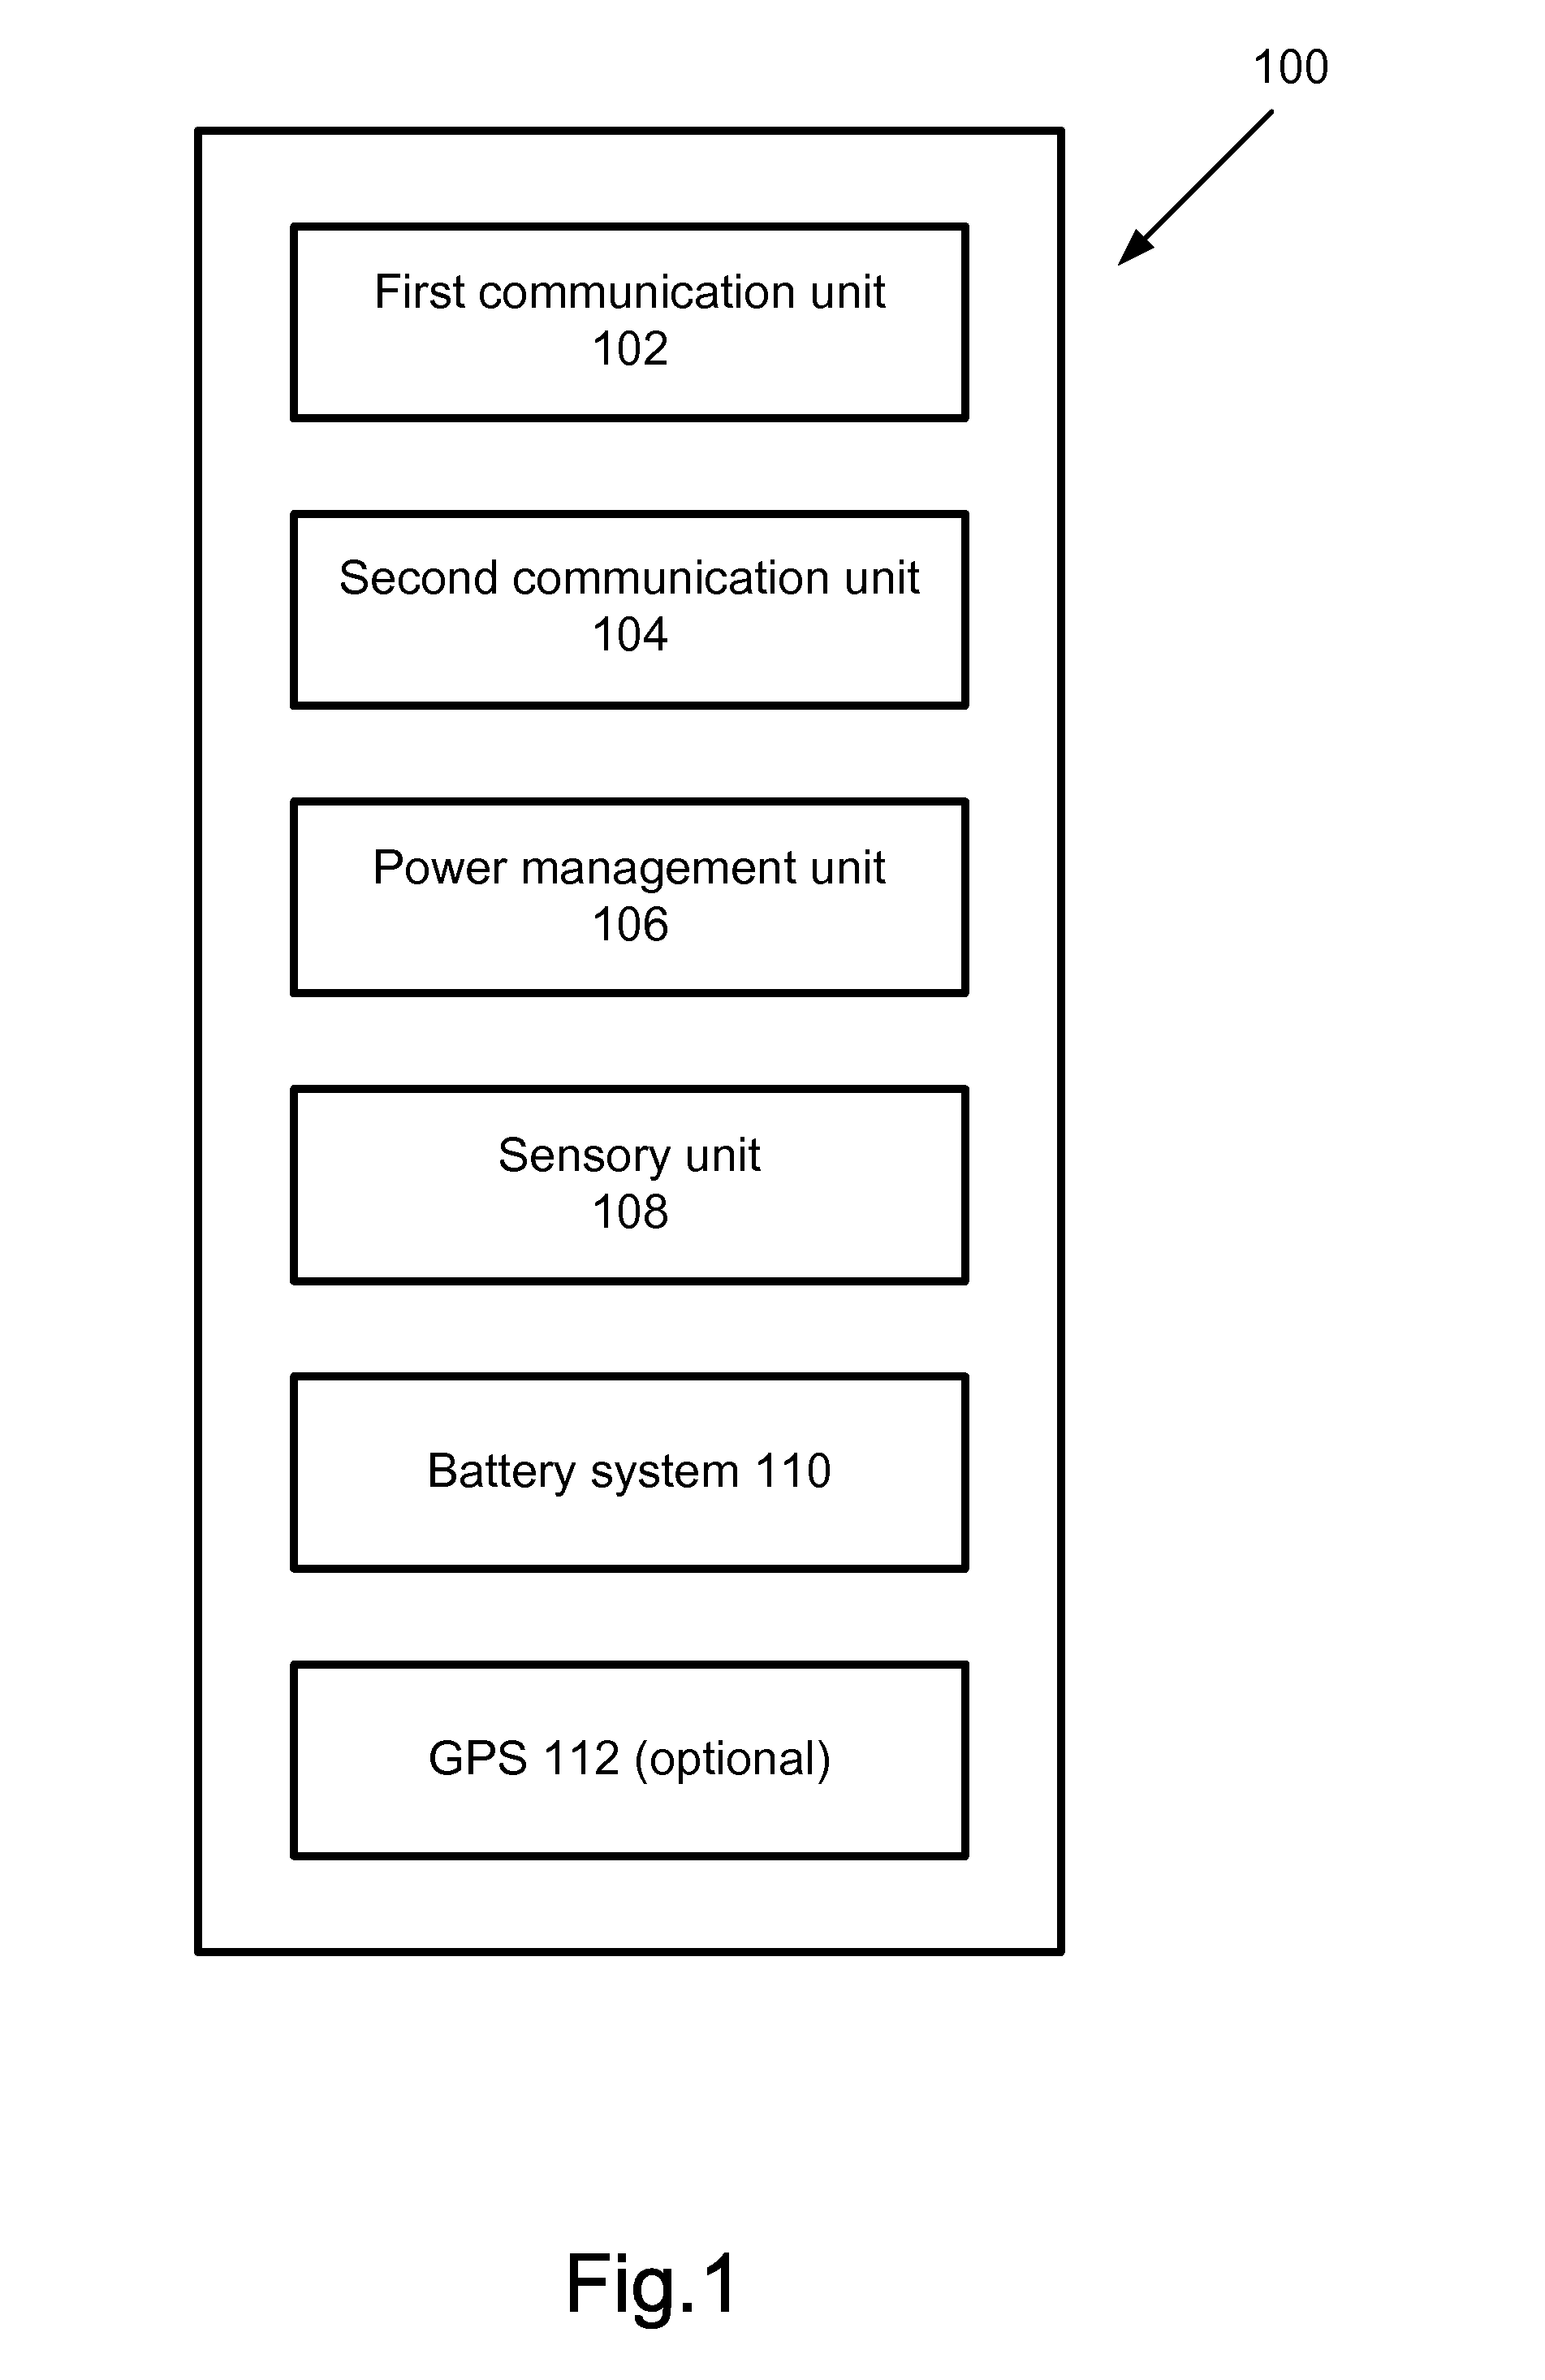 Method of power management for a handheld mobile computing and communiation device